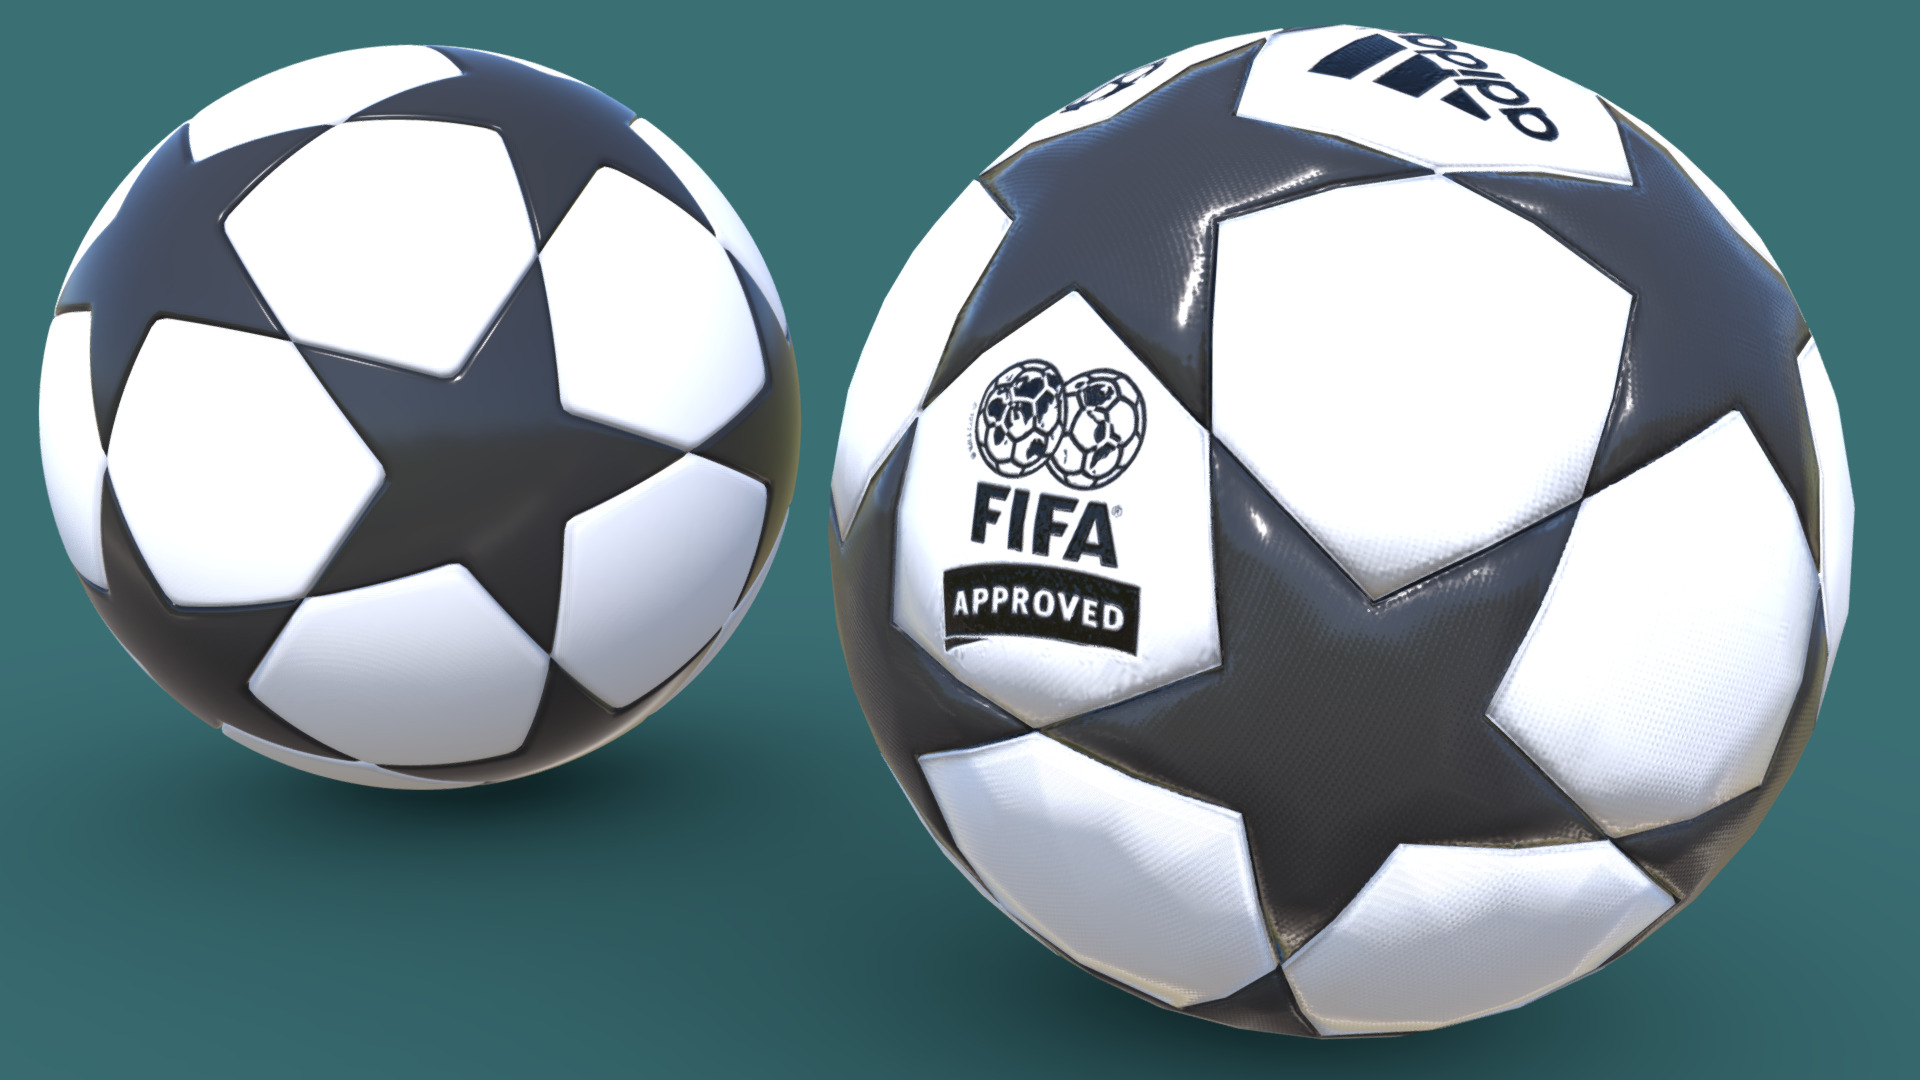 3D model 2019 Uefa Champions League Ball - This is a 3D model of the 2019 Uefa Champions League Ball. The 3D model is about logo.